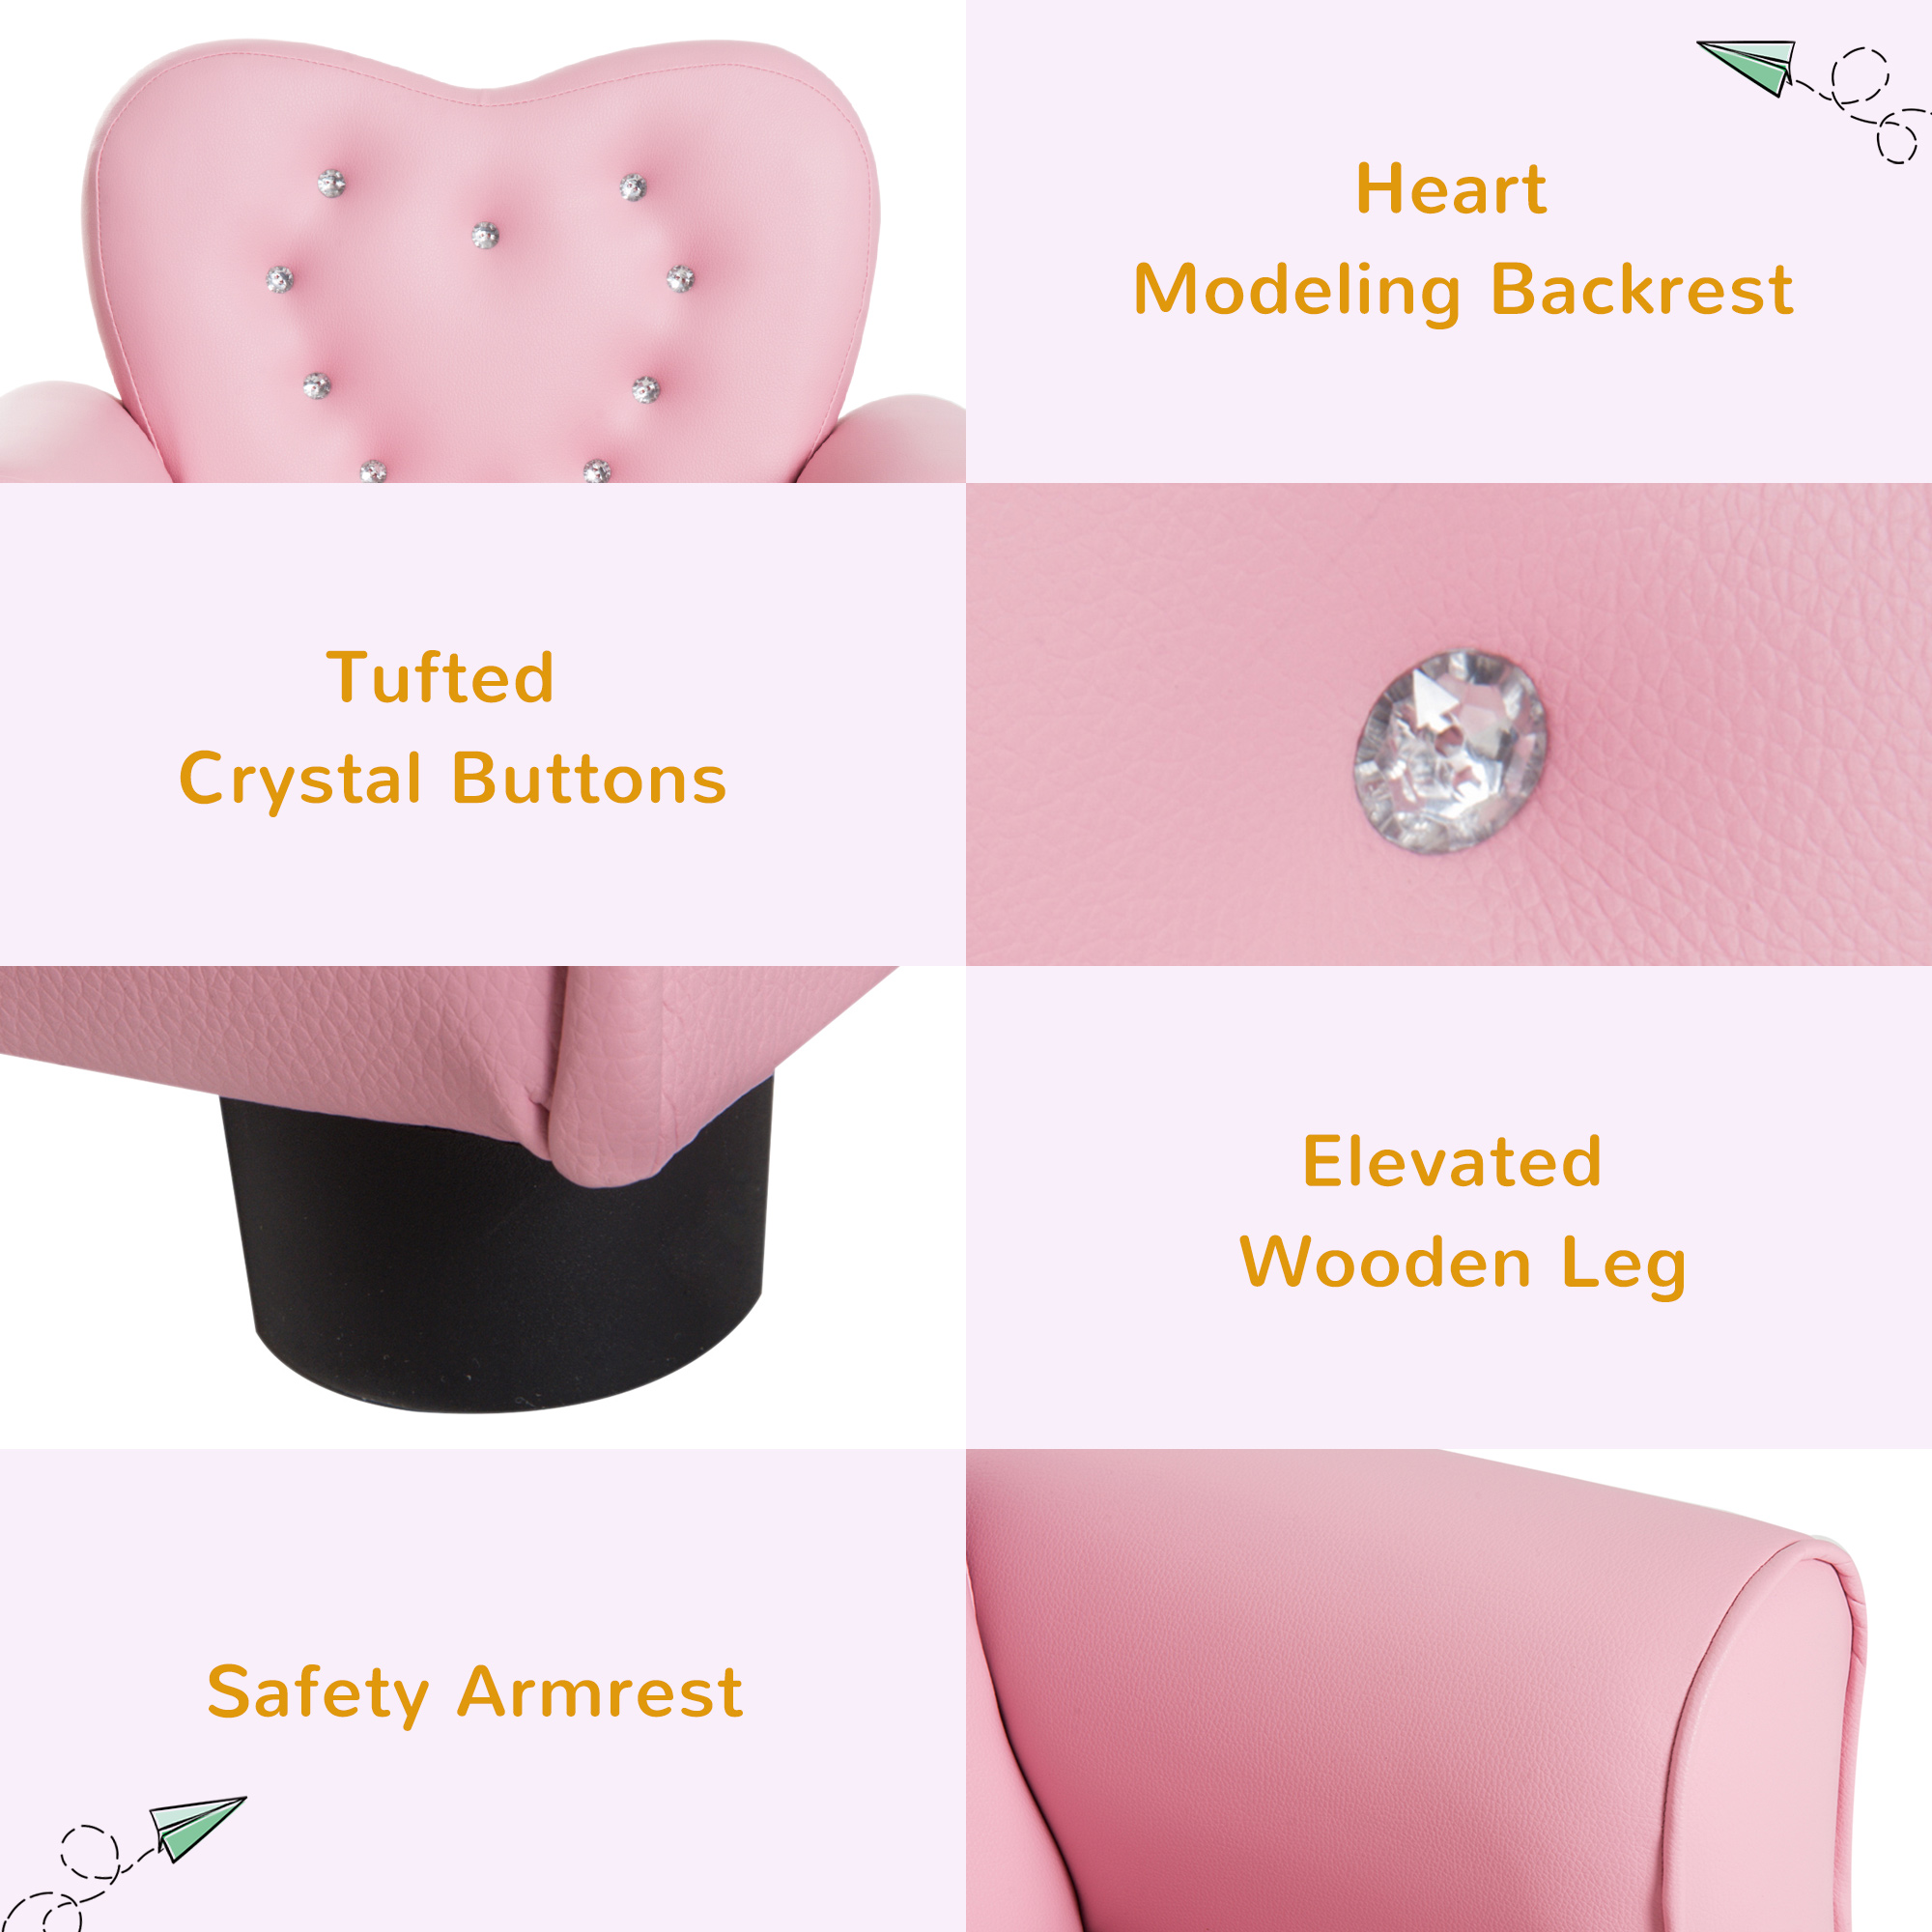 Qaba Kids Sofa Toddler Tufted Upholstered Sofa Chair Princess Couch Furniture with Diamond Decoration for Preschool Child, Pink - image 5 of 9